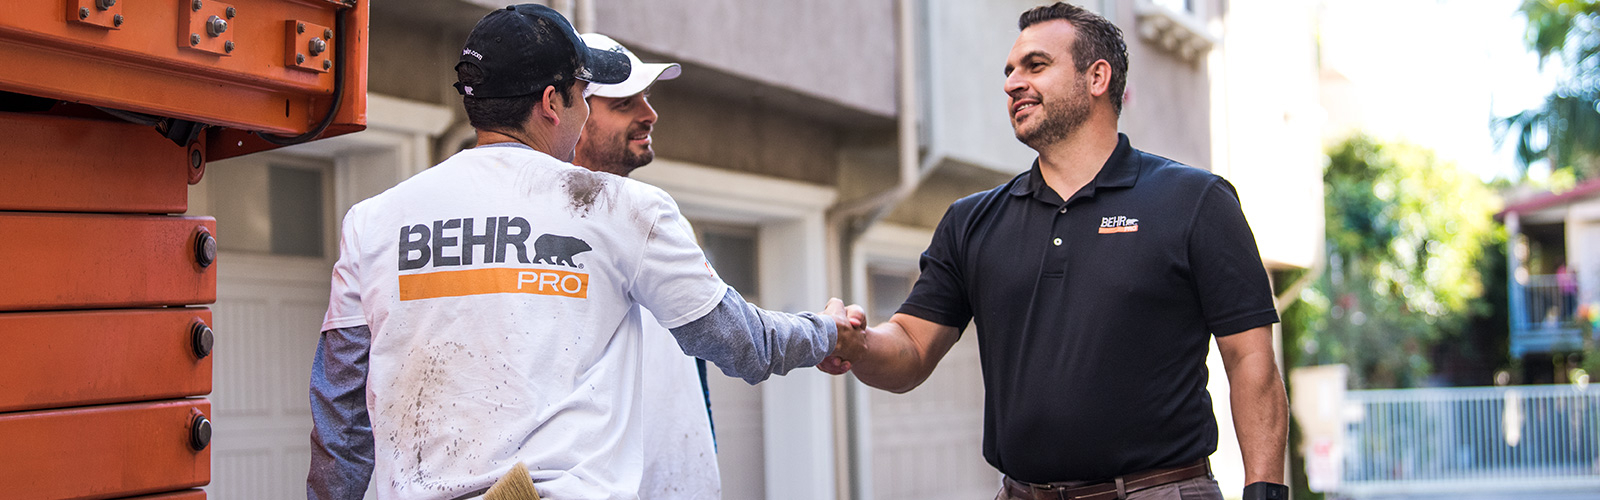 A BEHR PRO Rep shaking hands with on of the 2 Pro Painters. In the background is a multi family condo units.